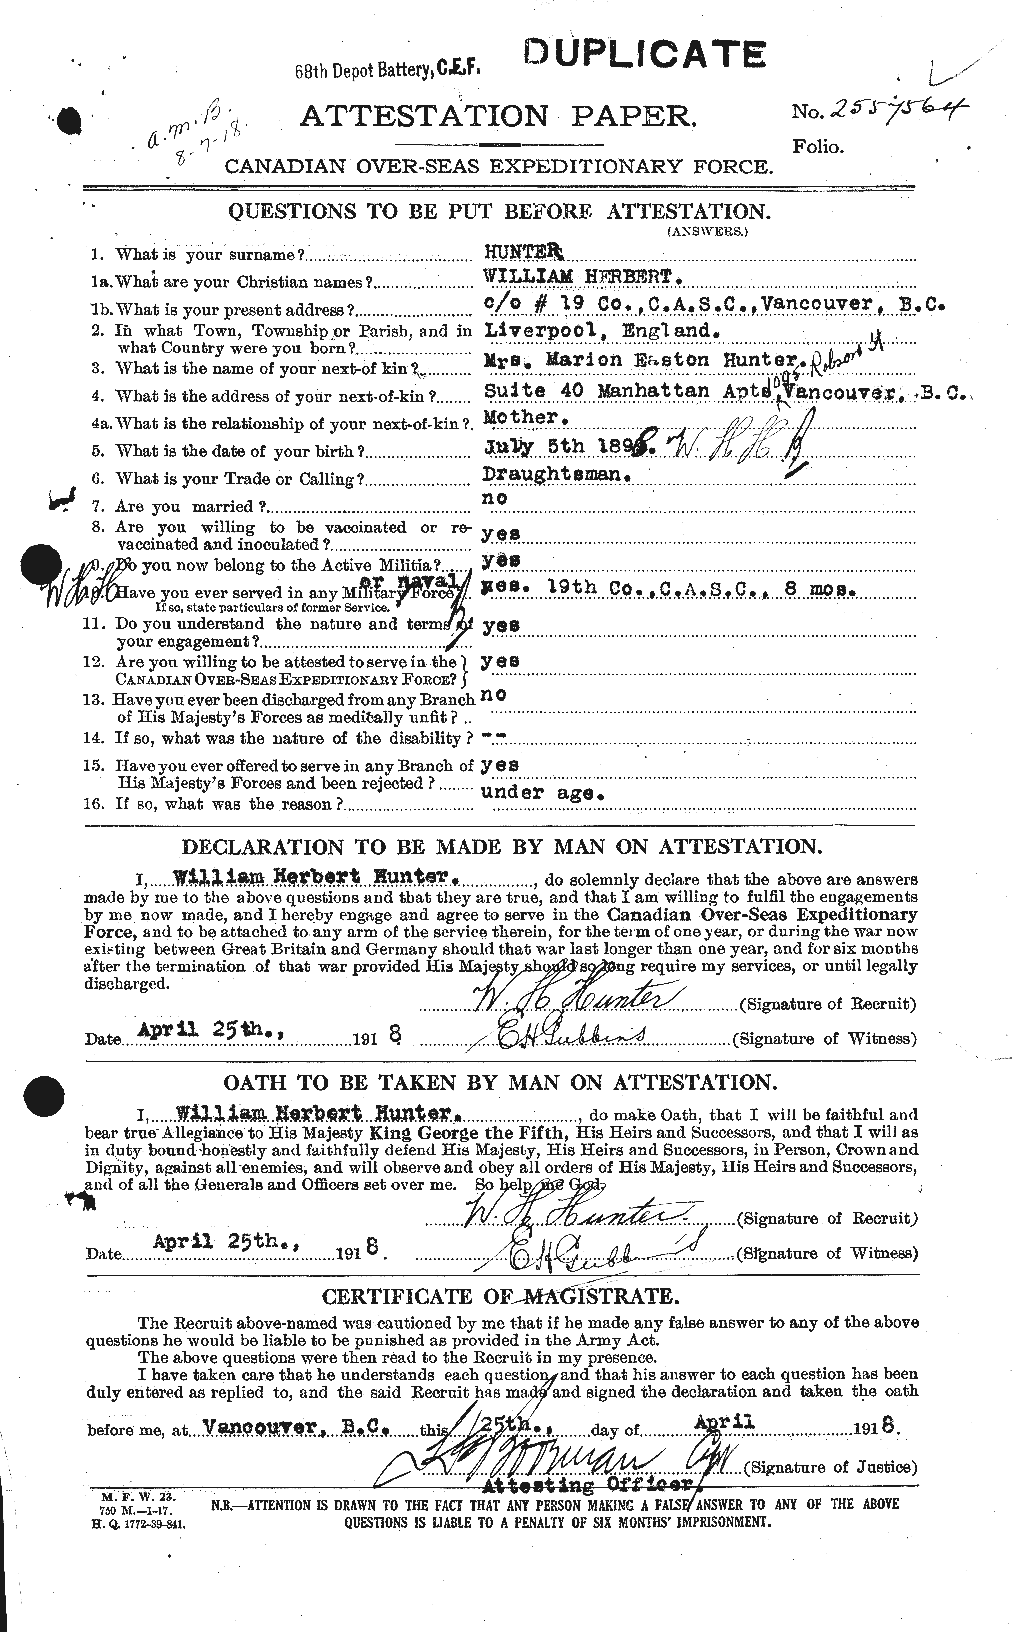 Personnel Records of the First World War - CEF 408209a